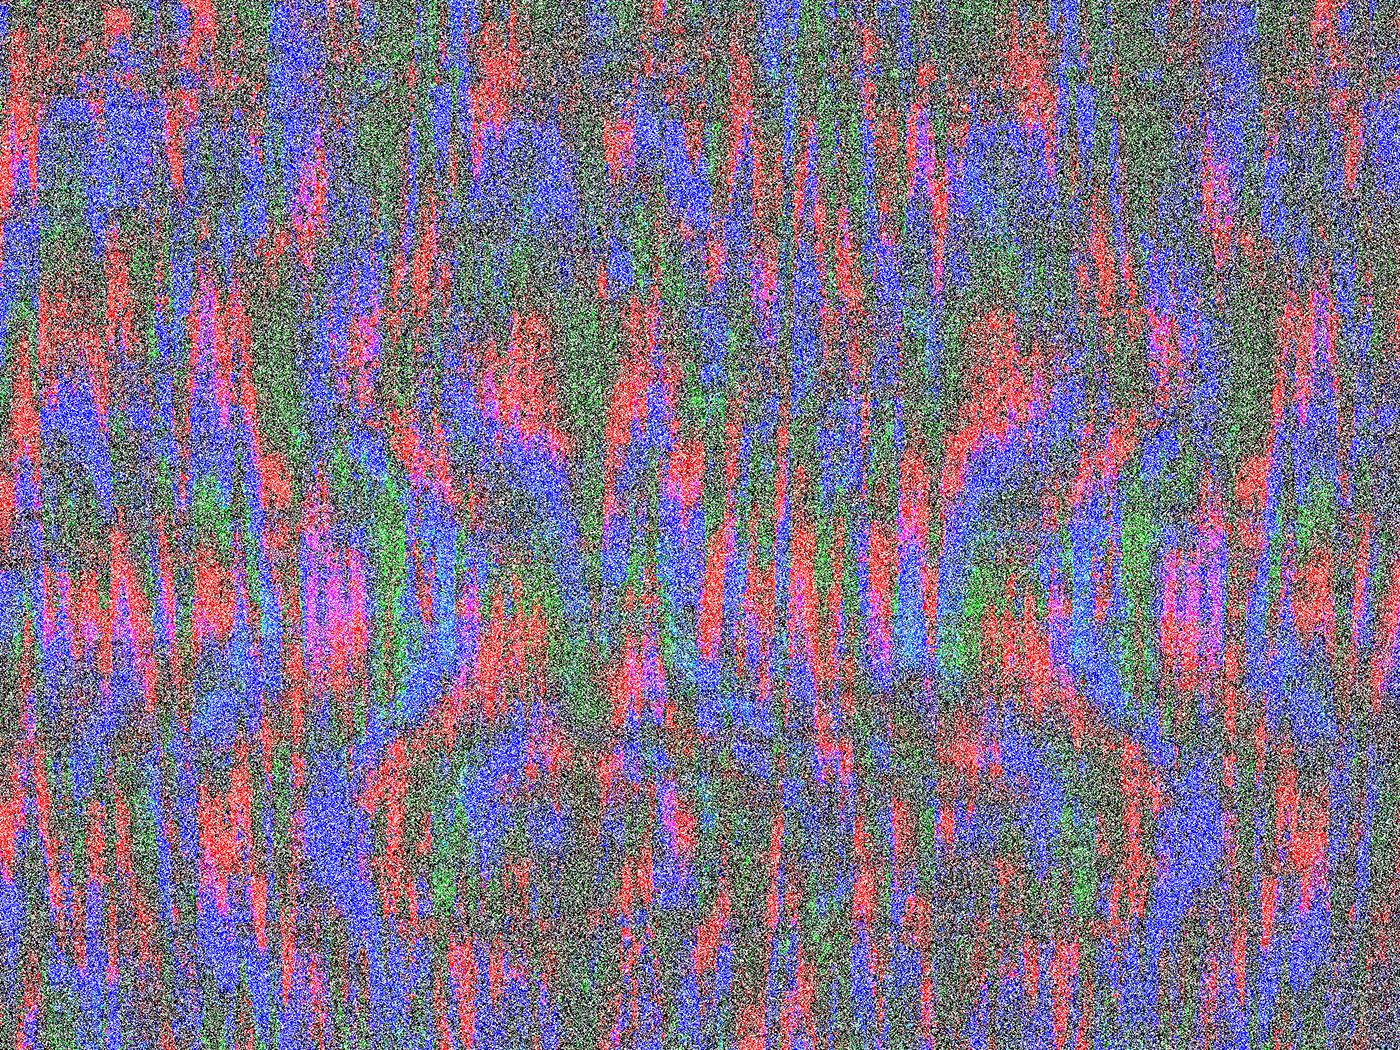 glitch texture free noise free textures vhs box texture free VHS extures vhs noise VHS noise free template VHS noise free textures VHS noise textures vhs overlay JPG vhs static texture